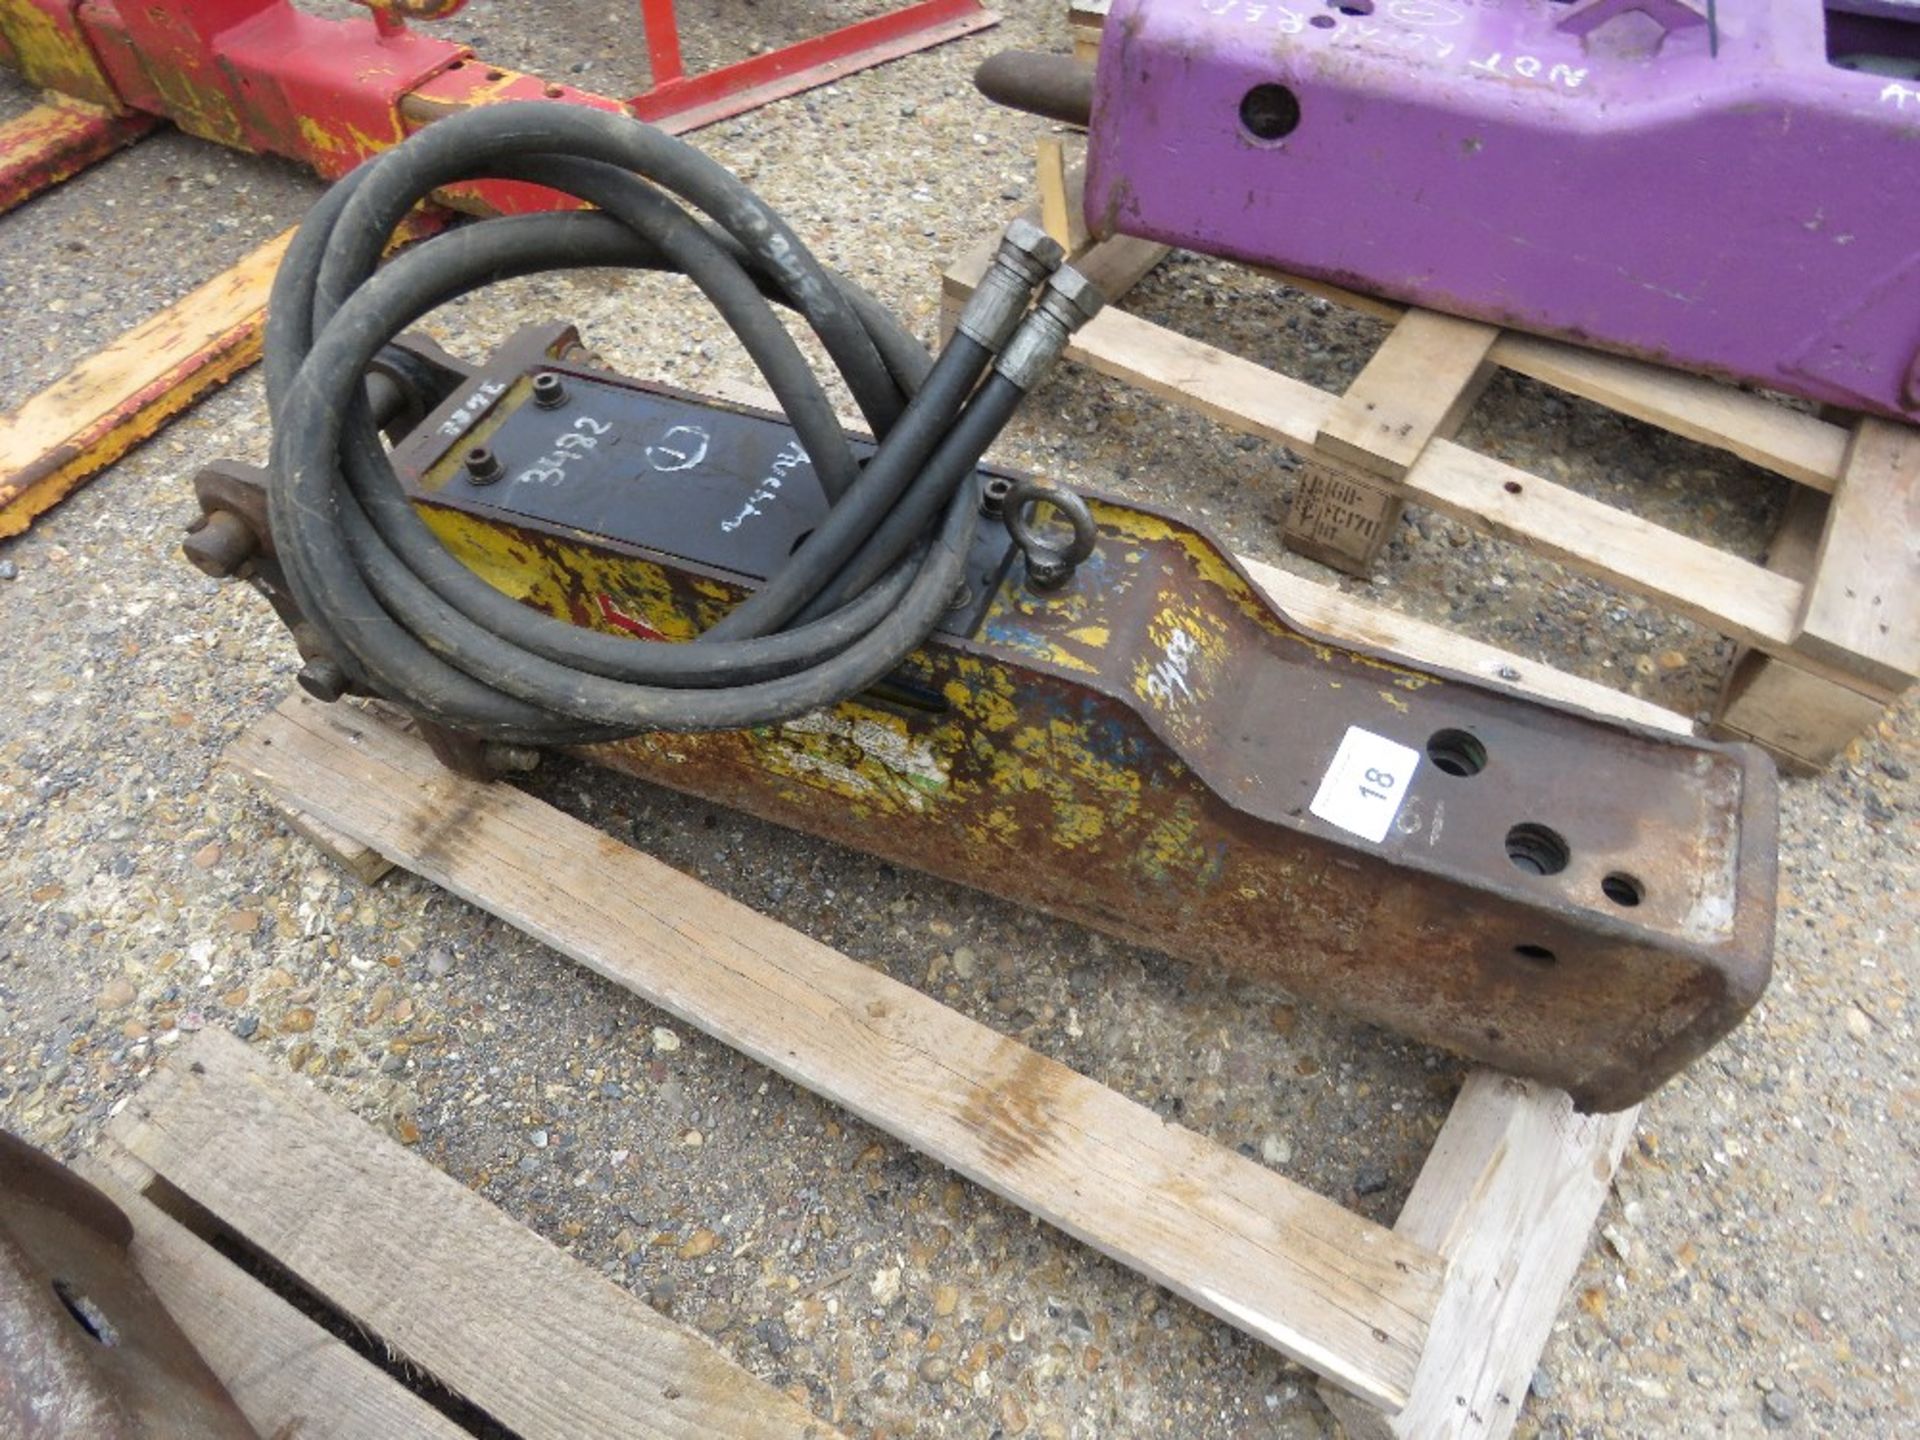 OKB EXCAVATOR MOUNTED HYDRAULIC BREAKER. 30MM PINS ON HEADSTOCK. SUITABLE FOR 3 TONNE MACHINE APPROX